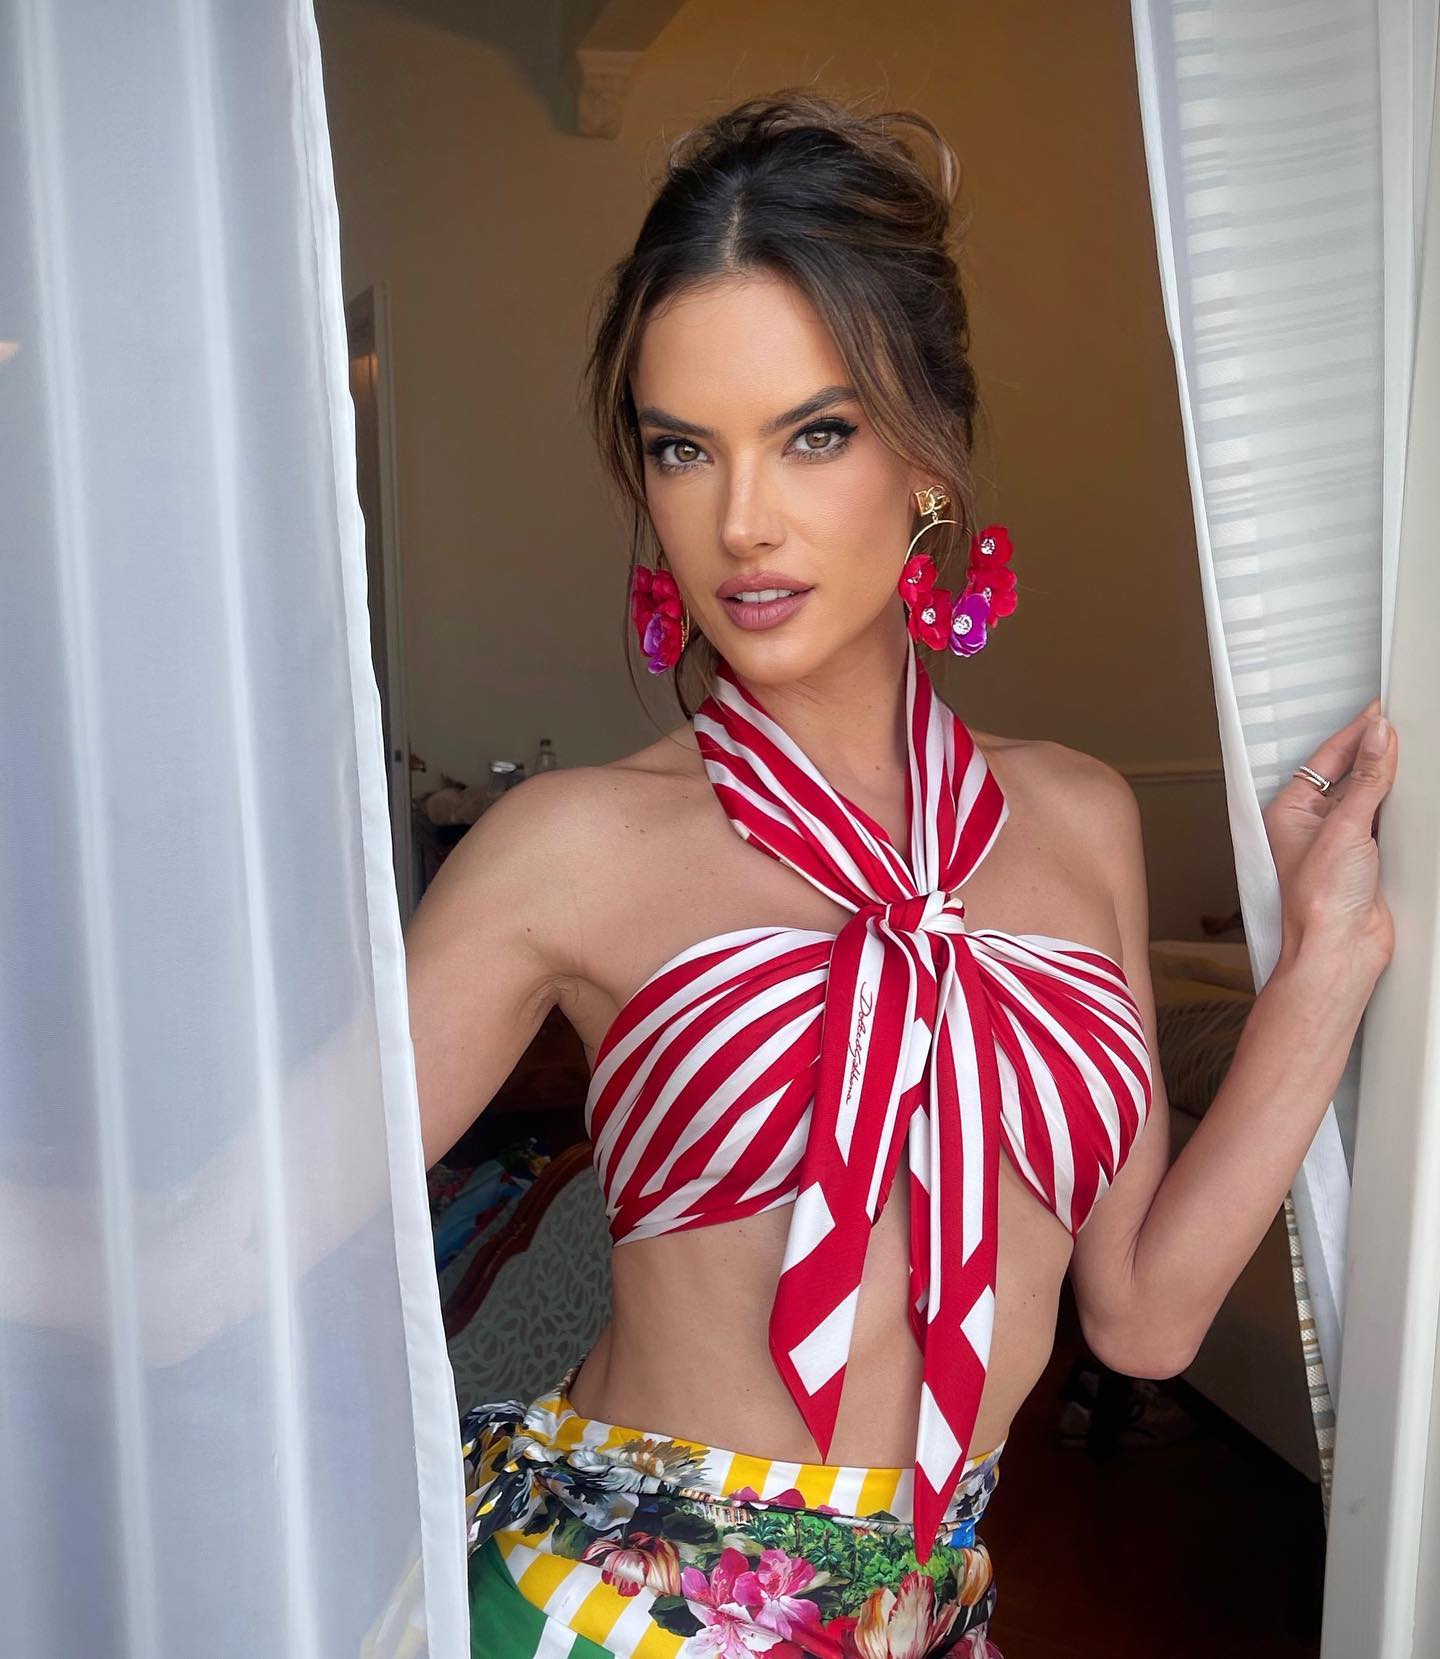 Alessandra Ambrosio is In The Fast Lane! - Photo 6